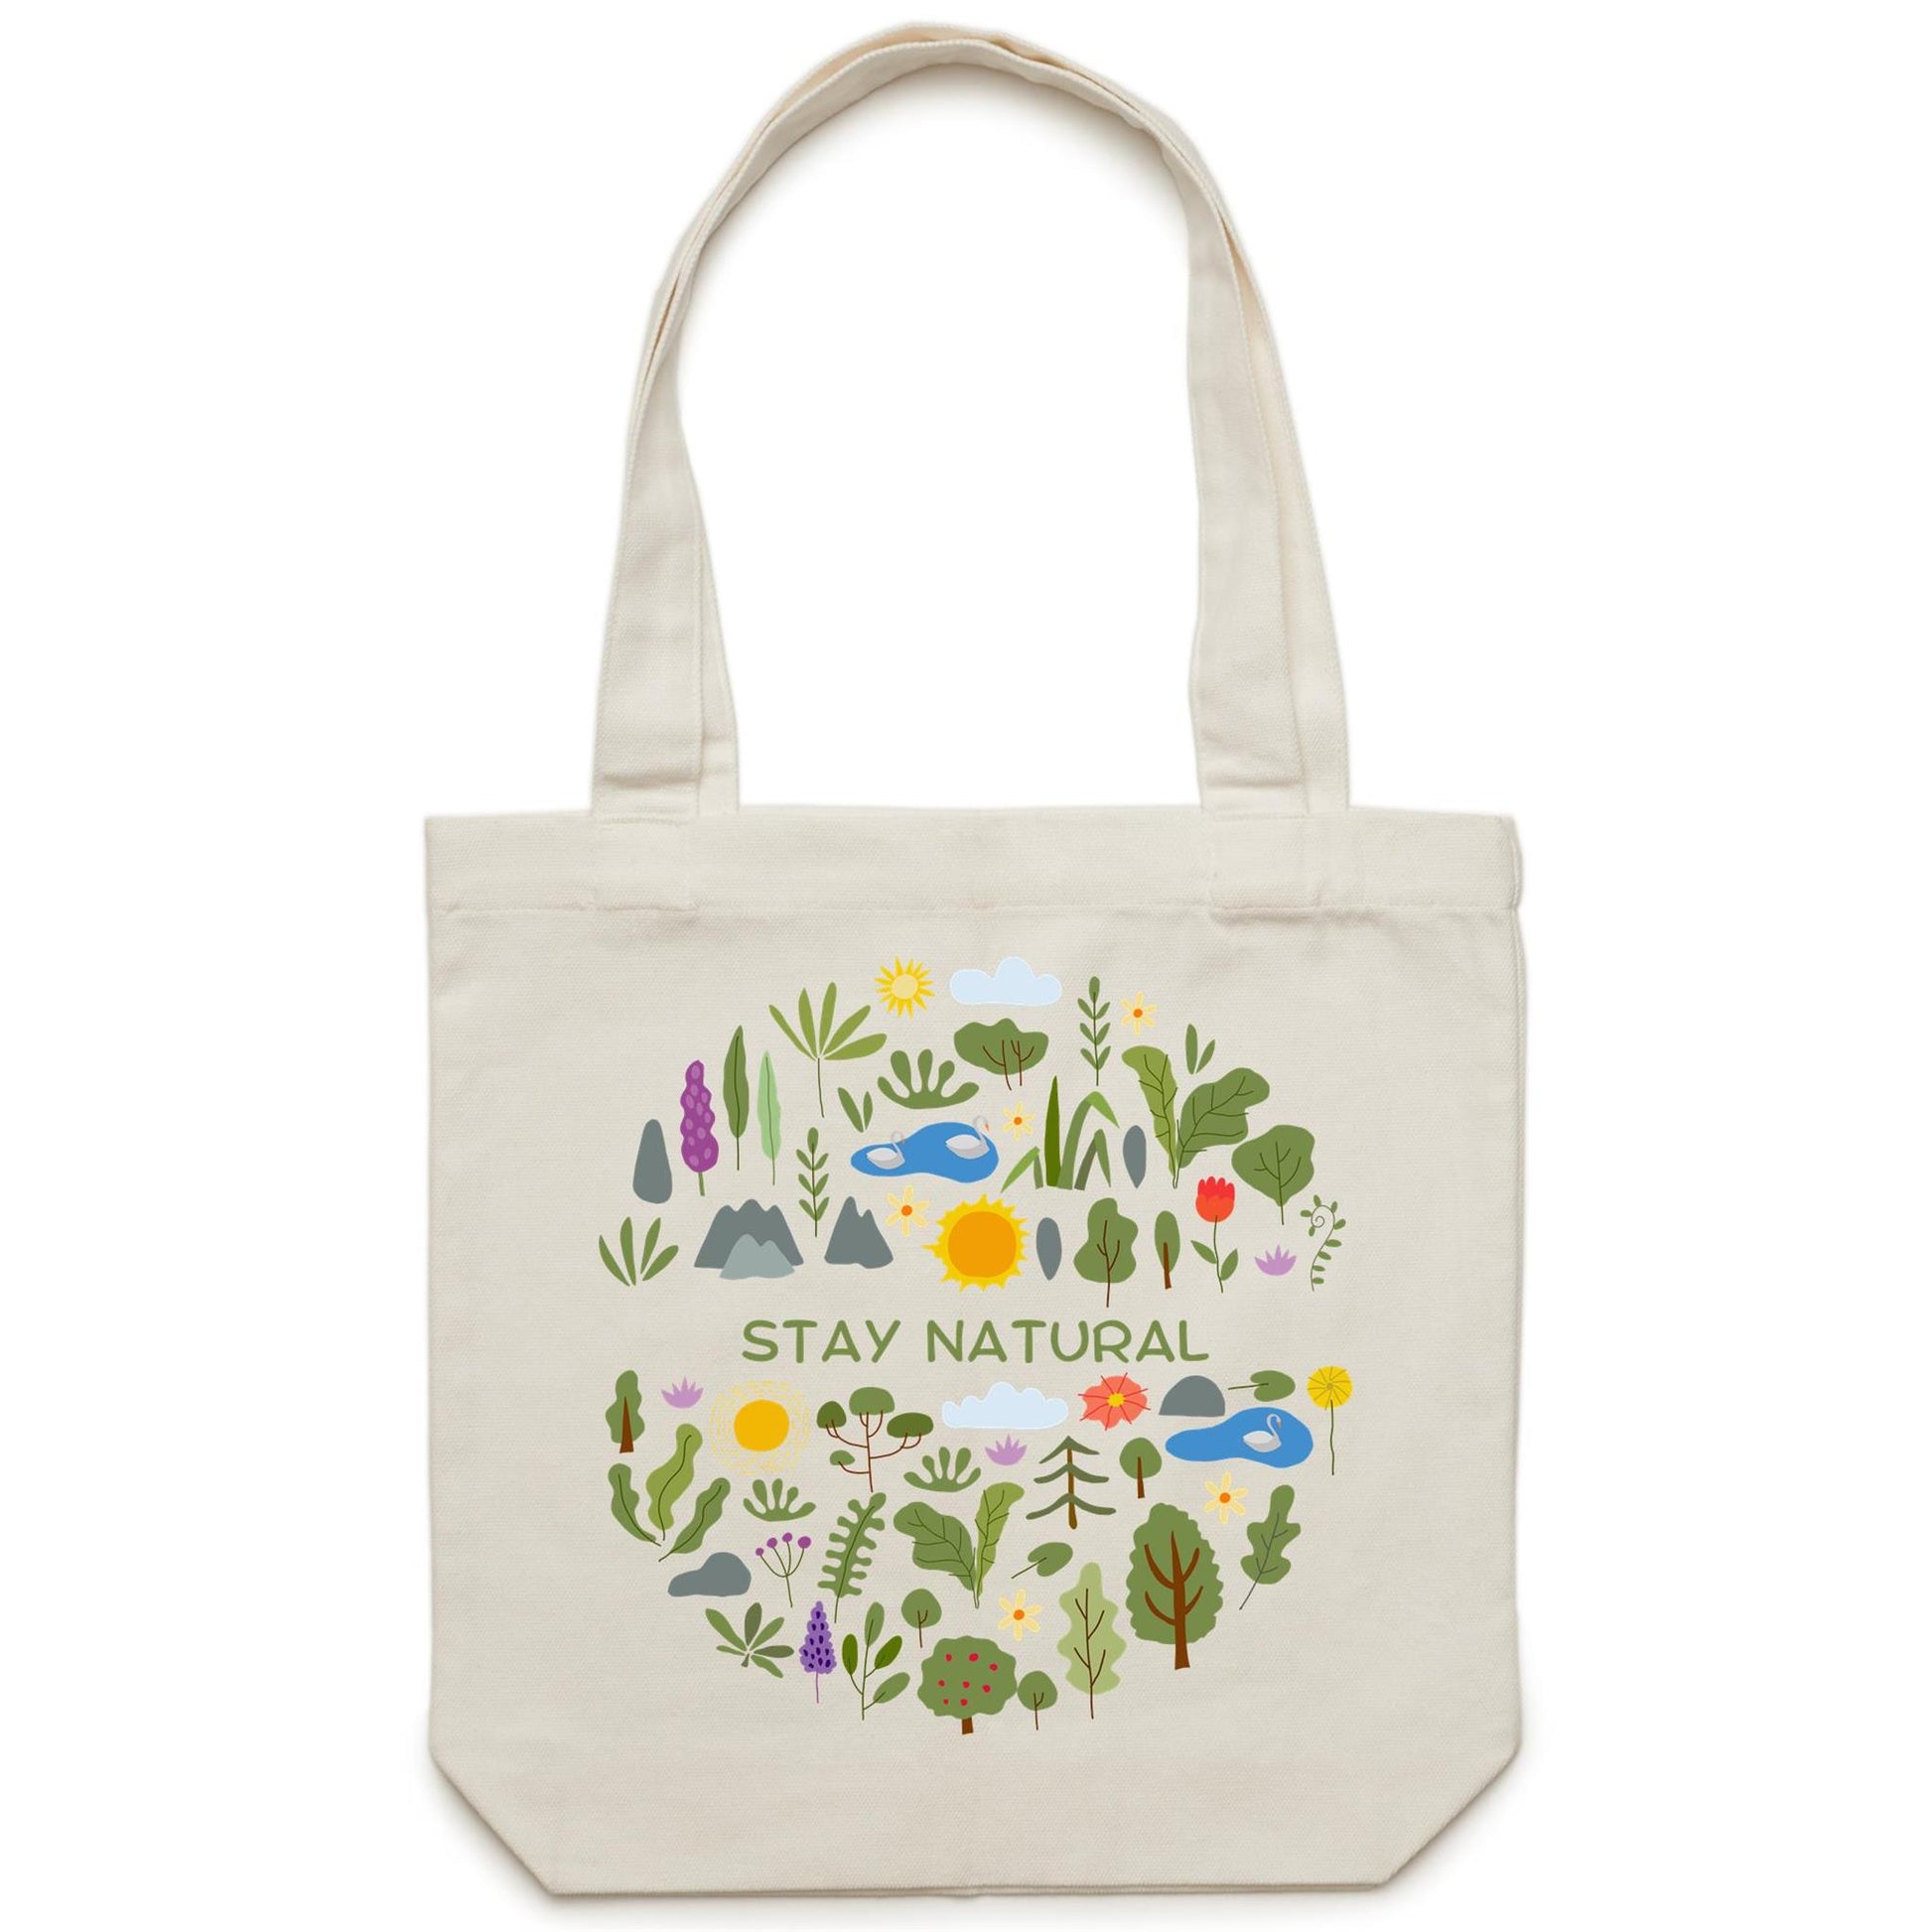 Stay Natural - Canvas Tote Bag Cream One Size Tote Bag Environment Plants